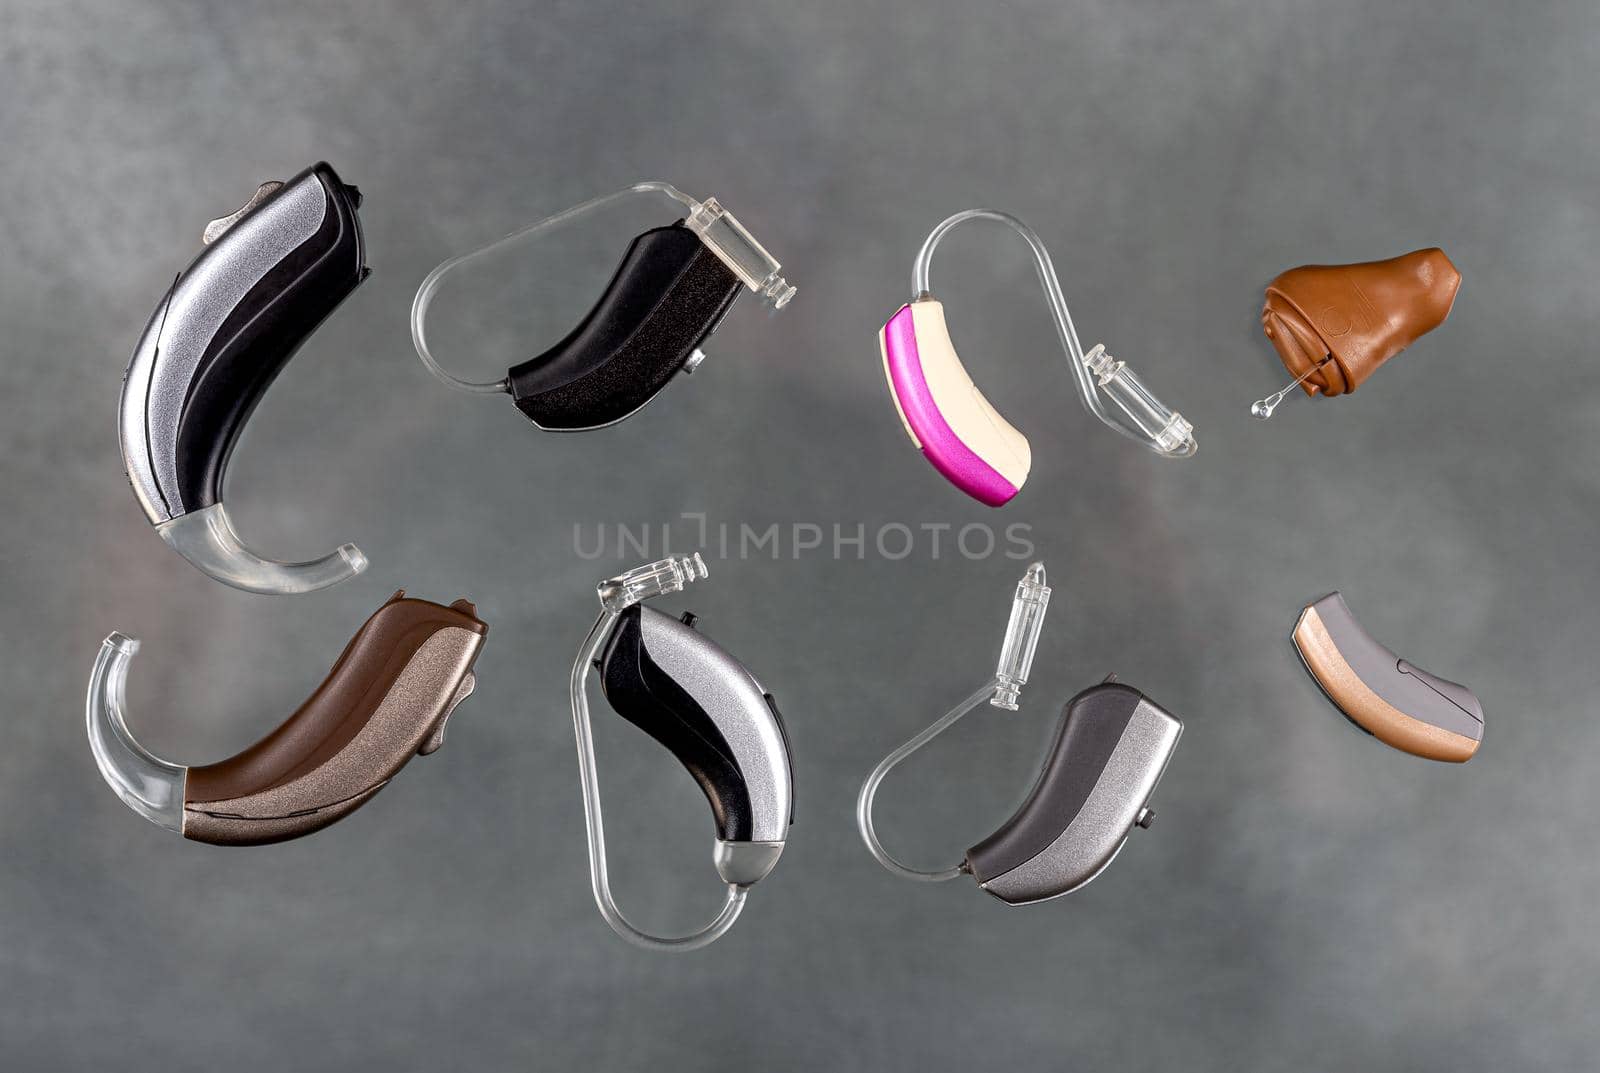 Close-up hearing aid on a light background